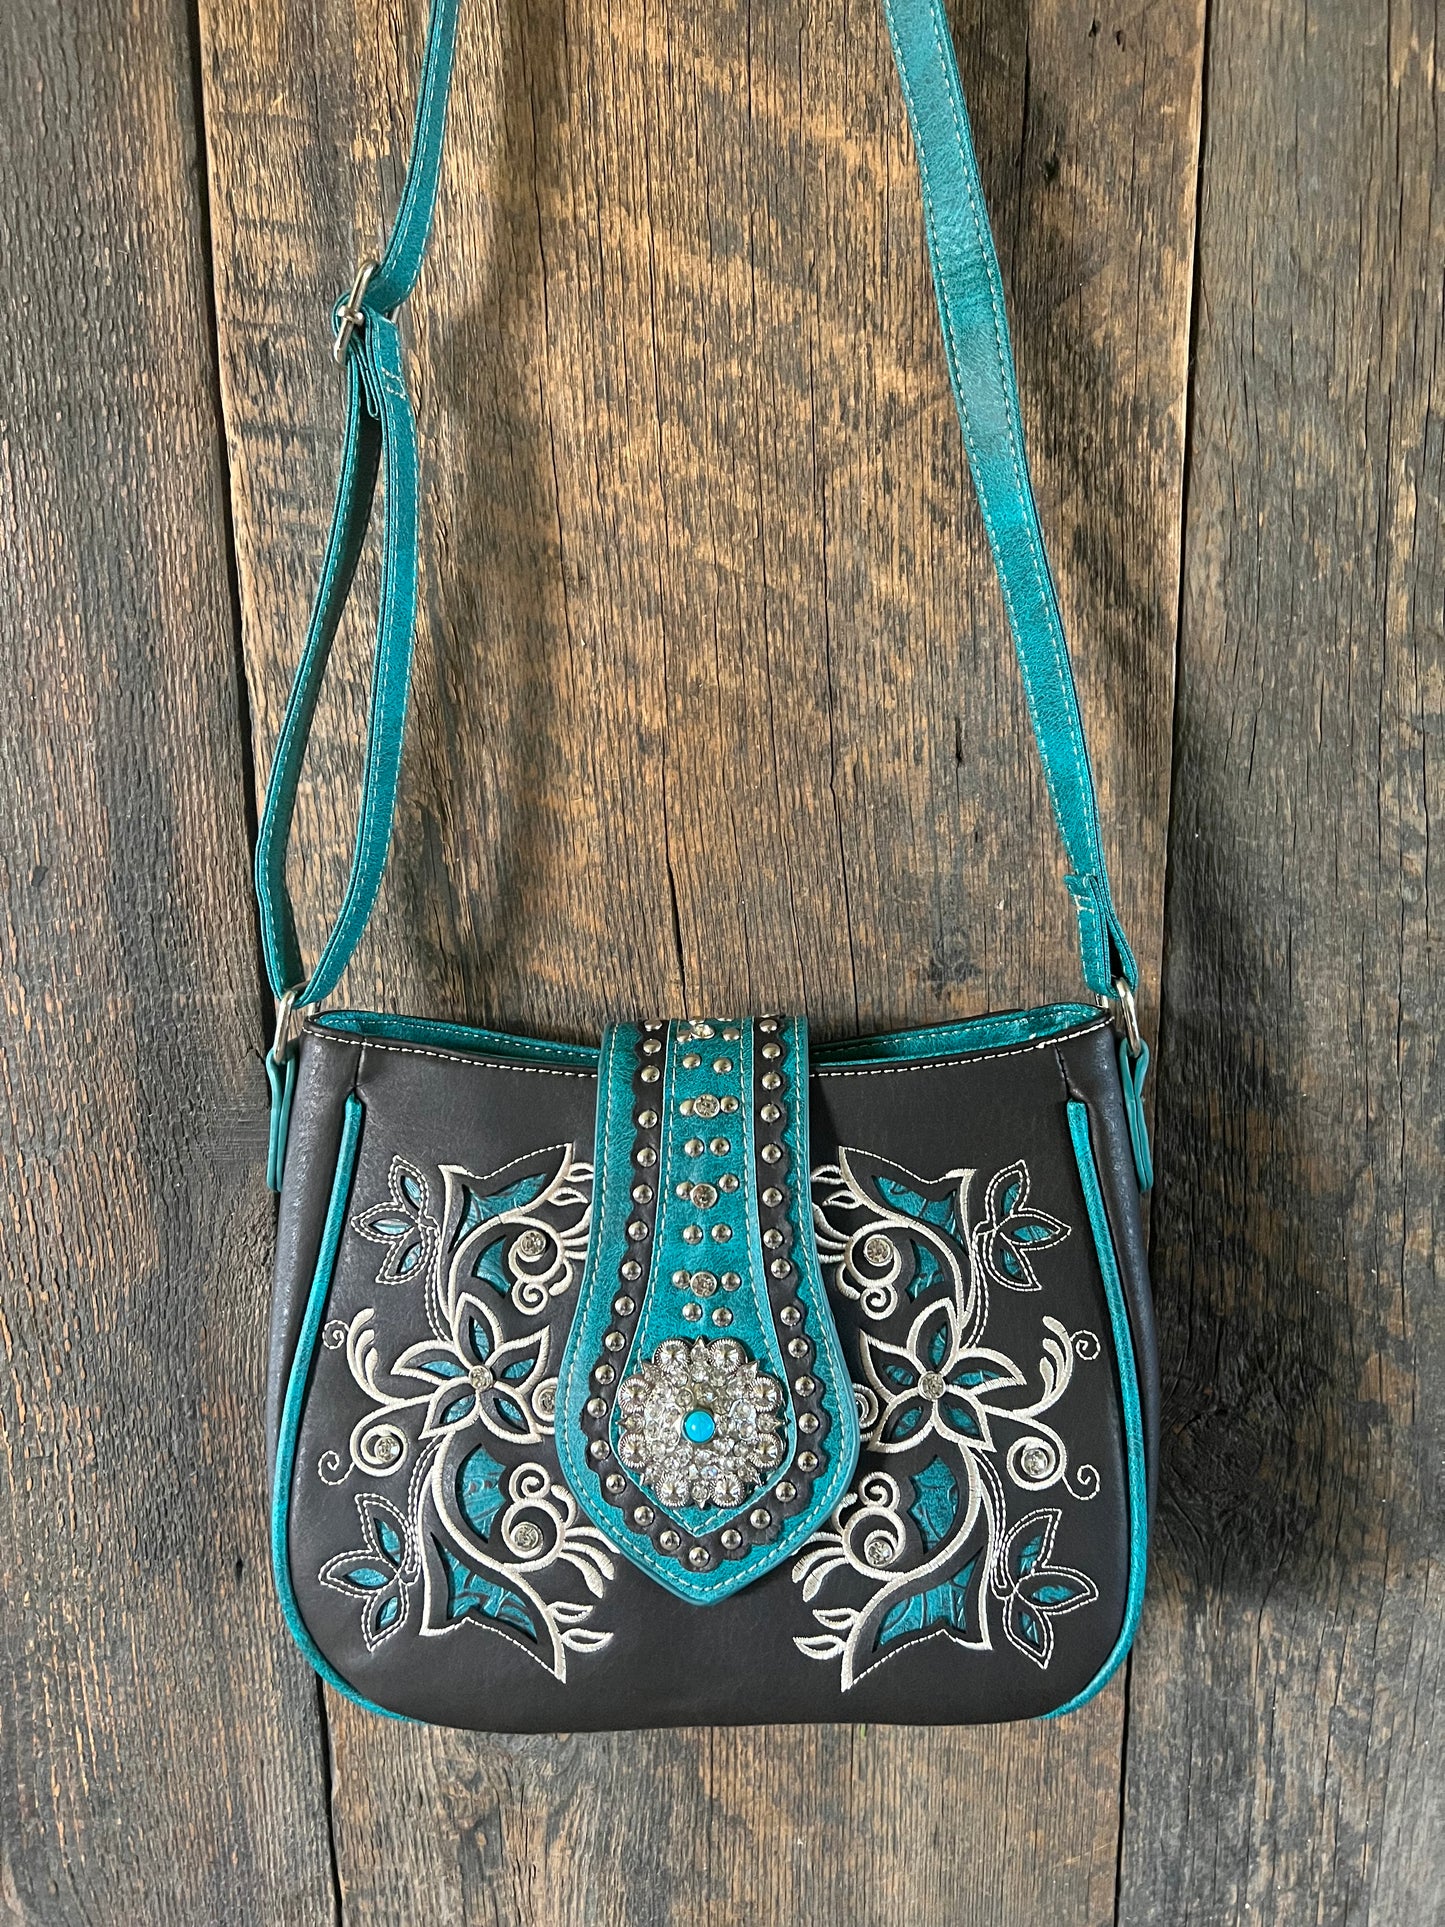 #230-TB  Turquoise/Black Western Purse with Concealed Carry Pocket